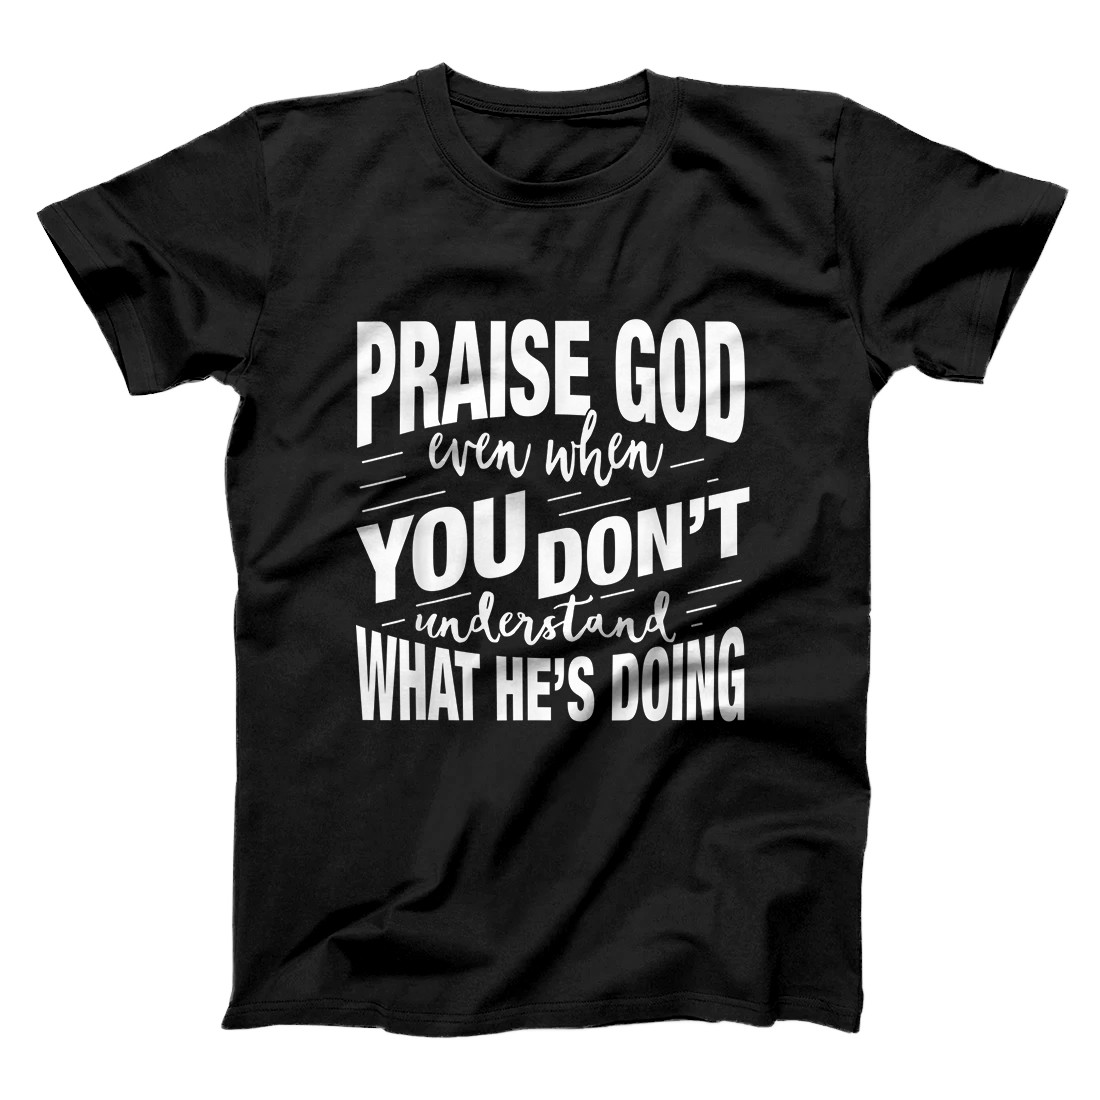 Personalized Praise God Even When You Don't Understand What He's Doing T-Shirt